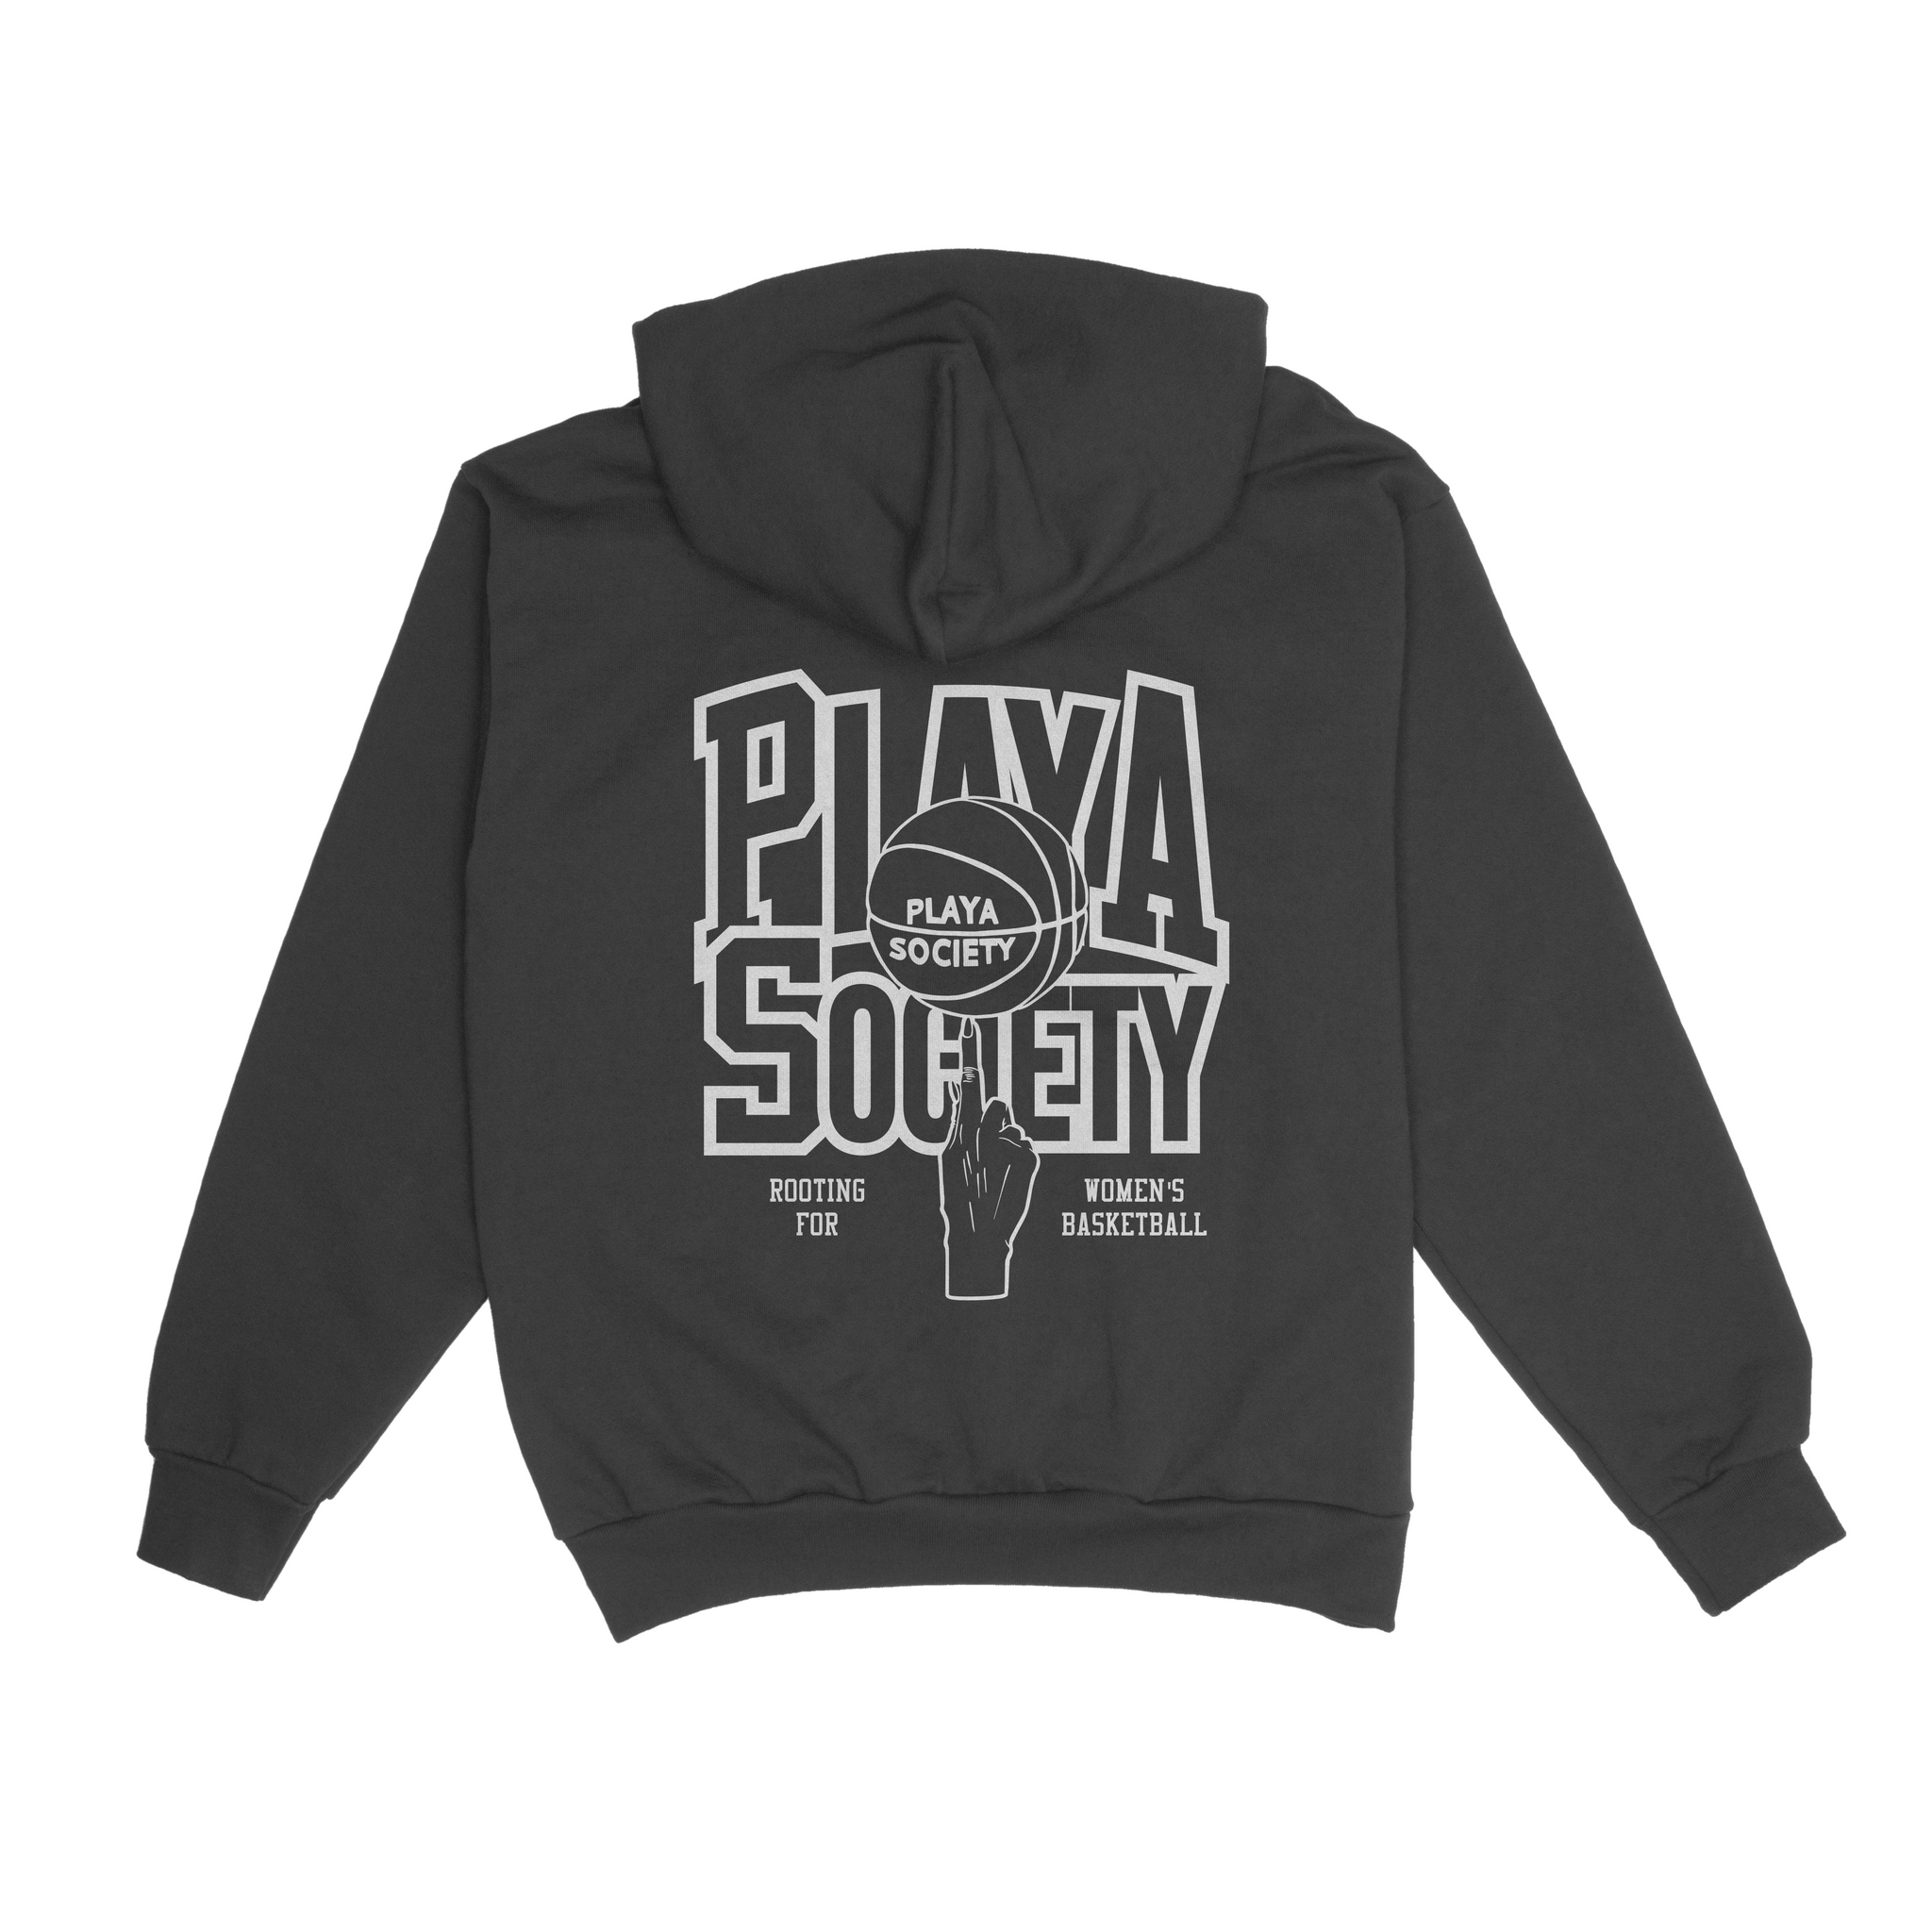 Rooting For WBB Oversized Hoodie - Playa Society